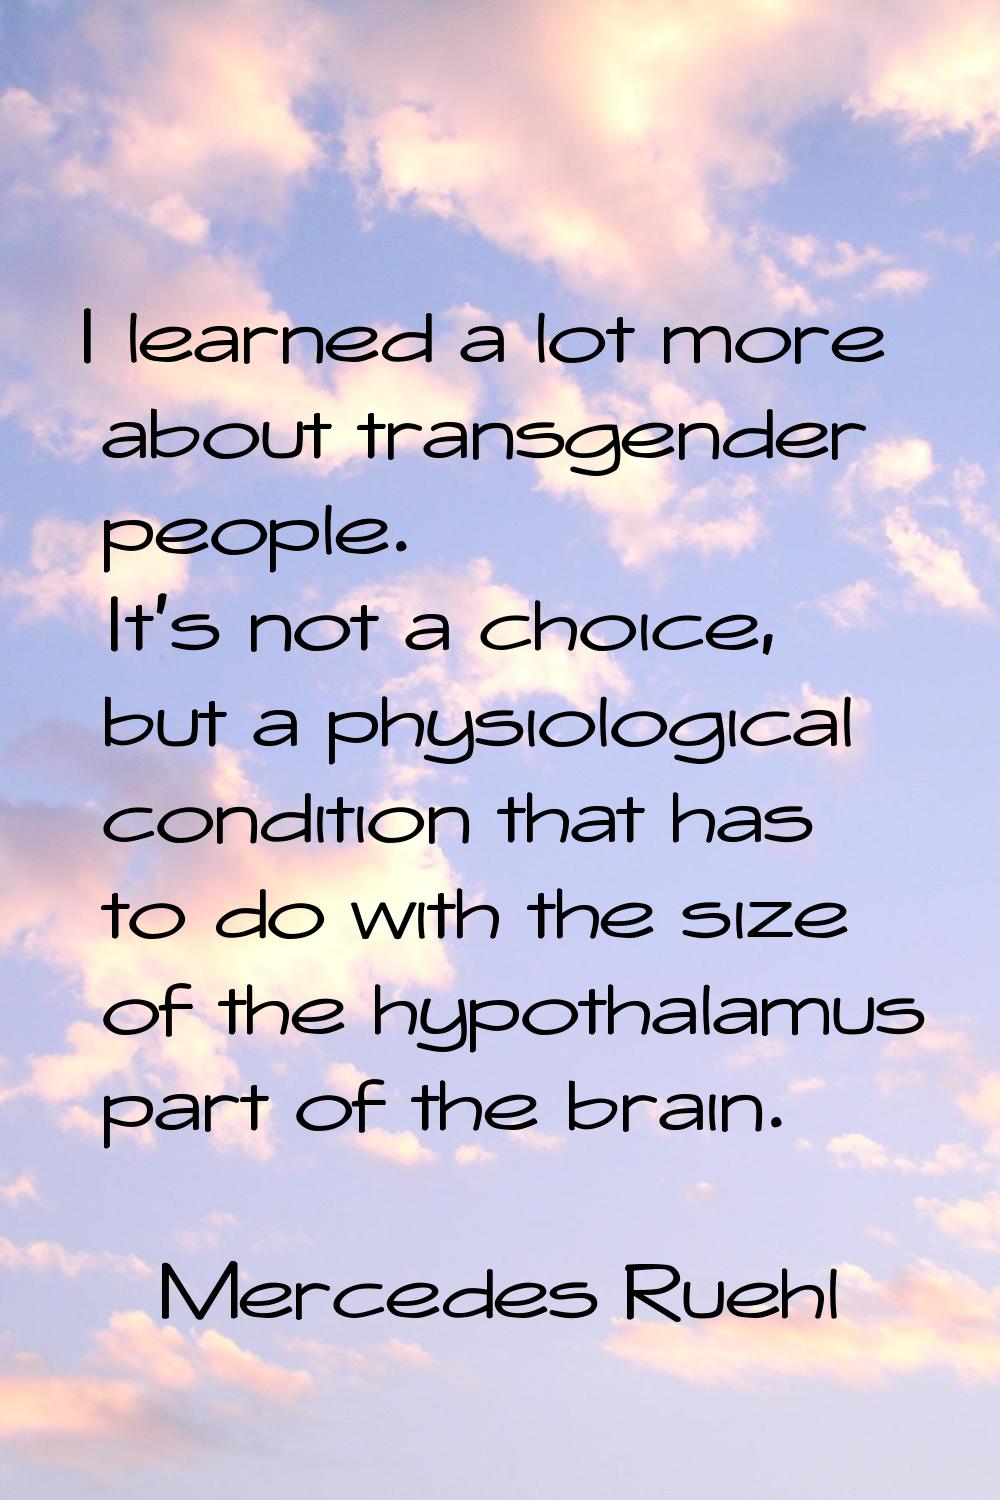 I learned a lot more about transgender people. It's not a choice, but a physiological condition tha